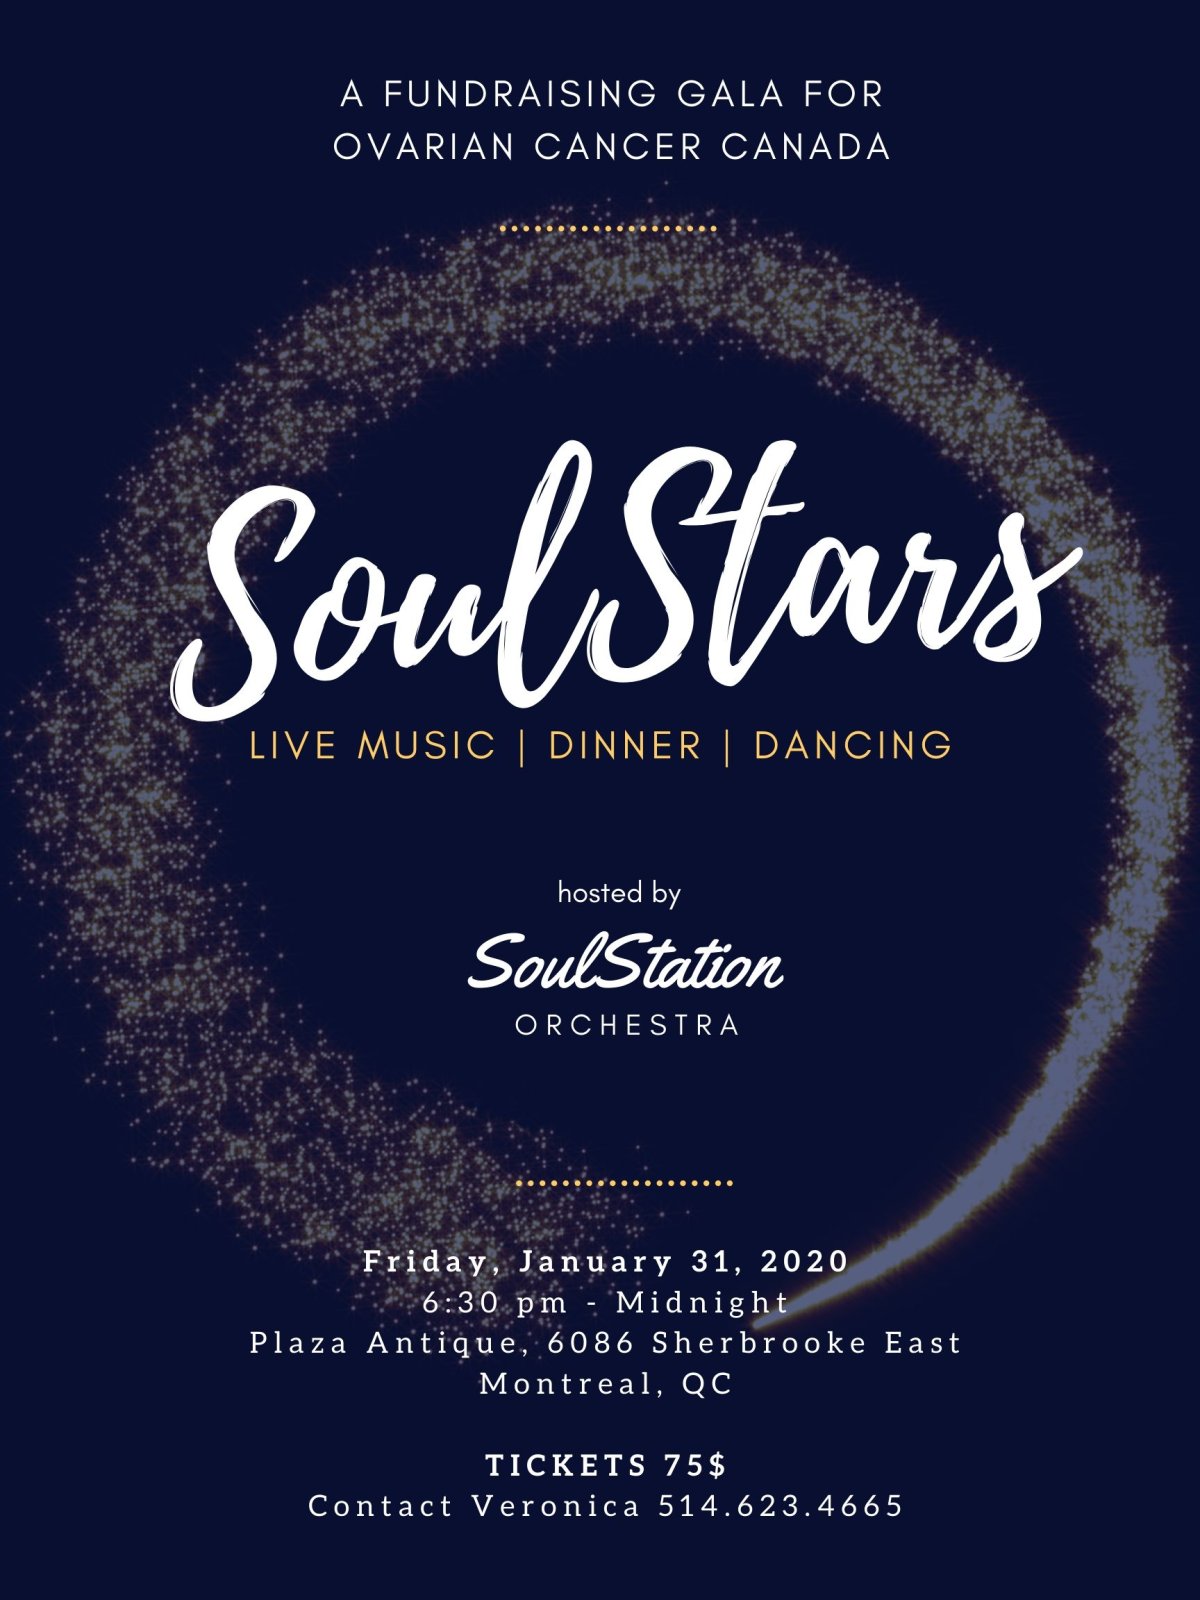 SoulStars Fundraising Gala for Ovarian Cancer Canada - image